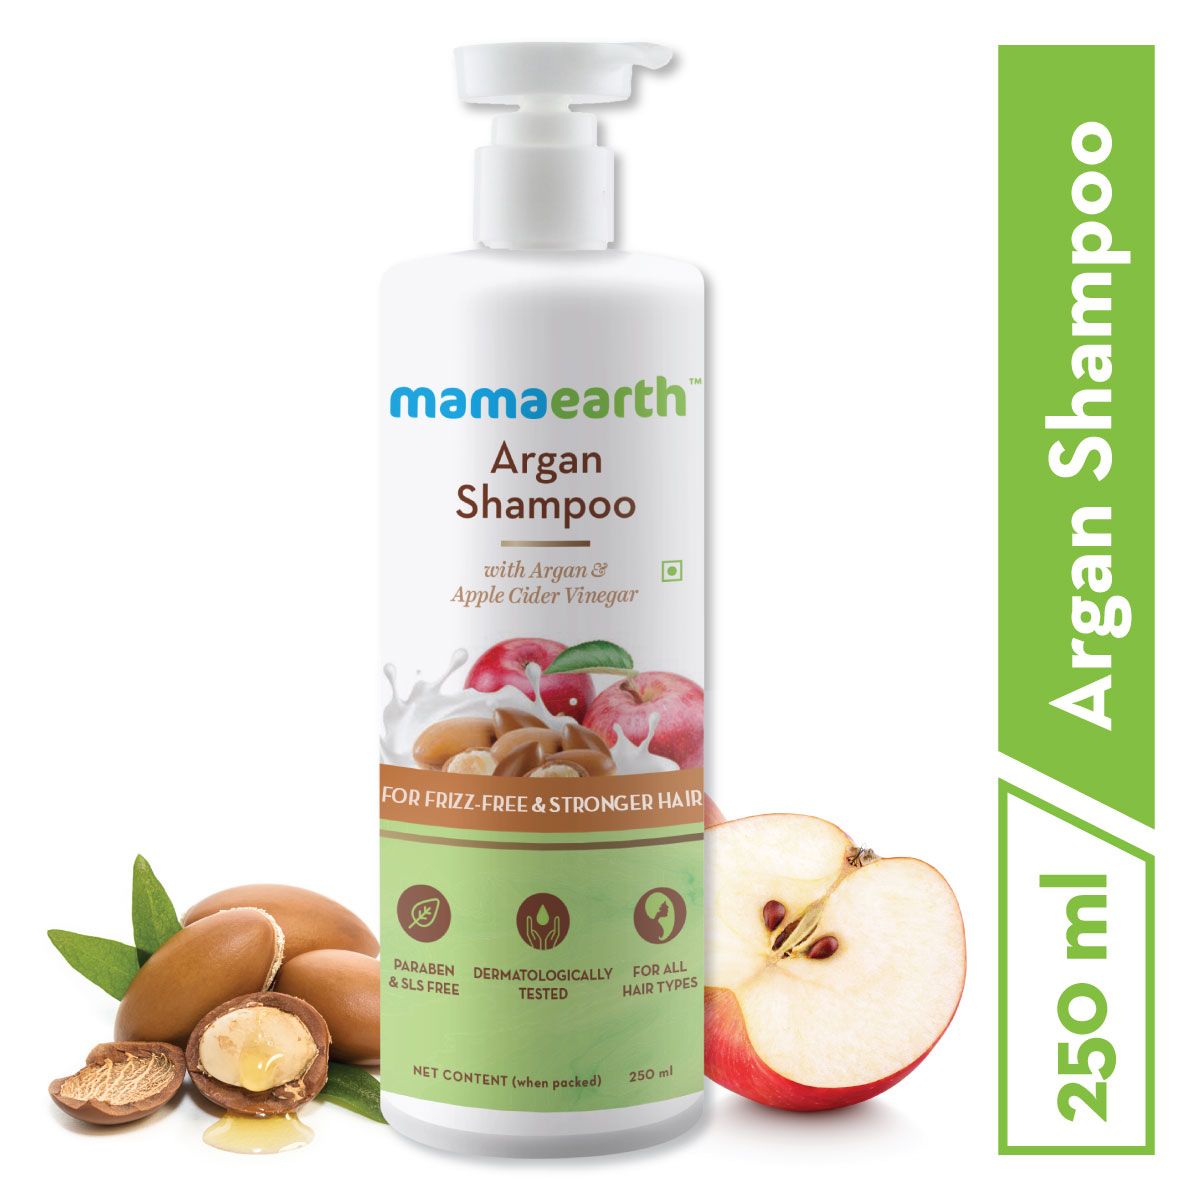 Mamaearth Argan Shampoo Better Than Others Available in the Market